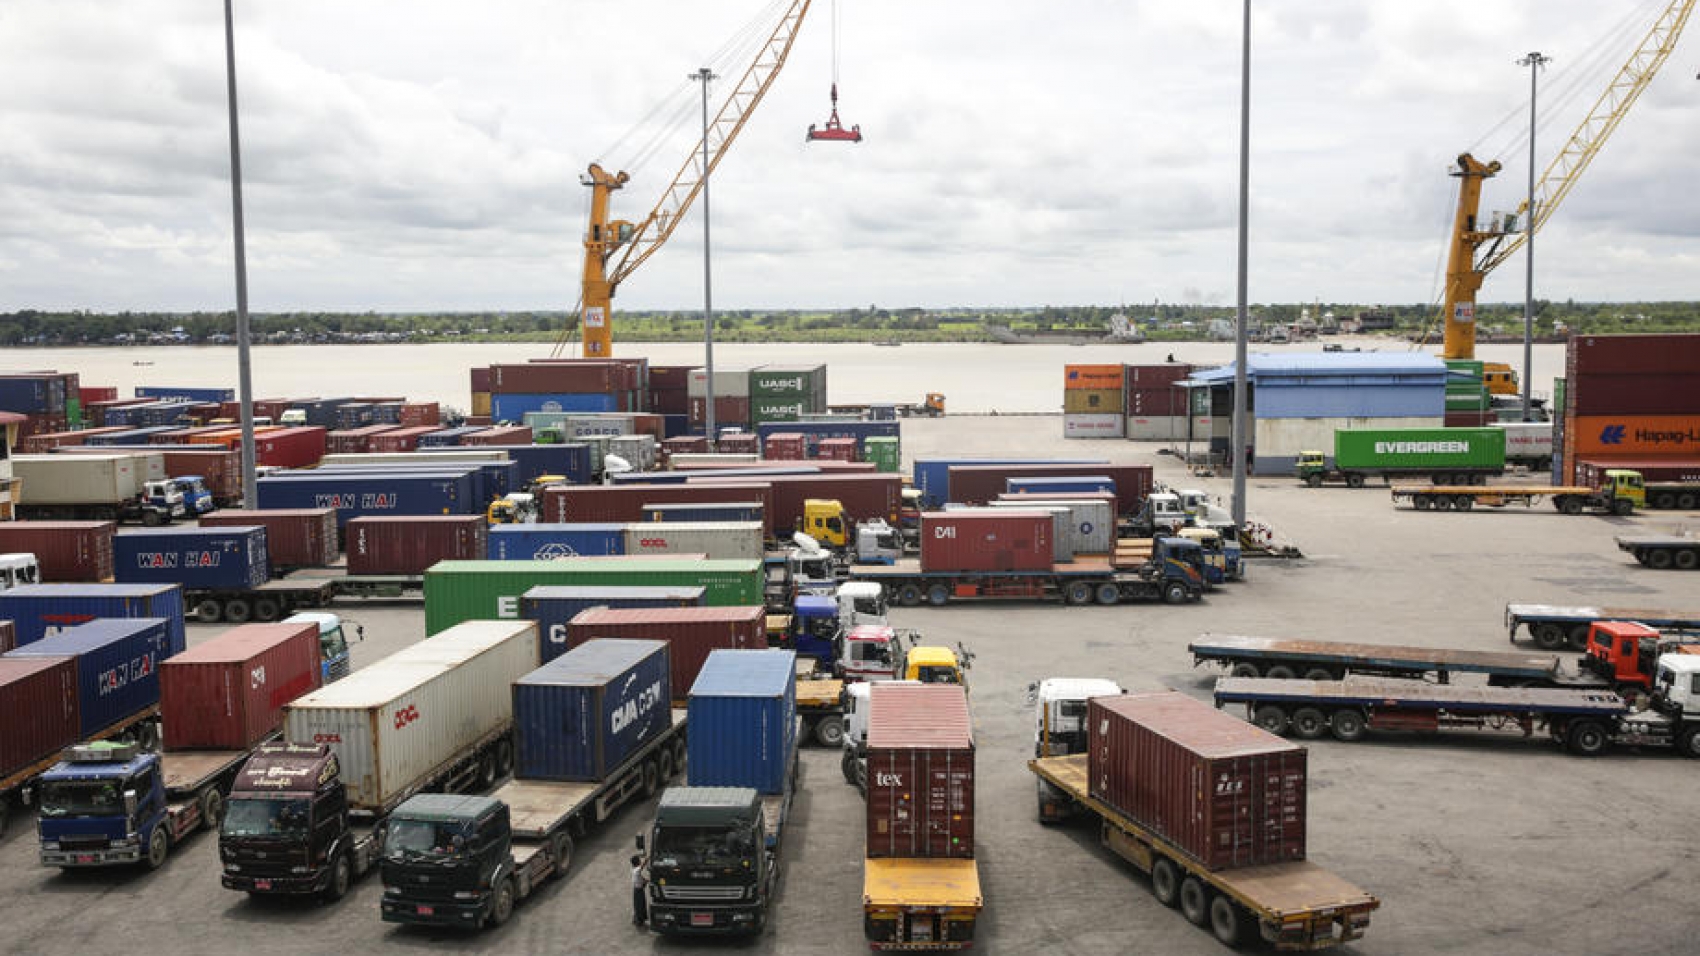 epa07799064 A general view shows trucks loaded containers at Asia World shipping container terminal in Yangon, Myanmar, 28 August 2019. According to figure by Myanmar Ministry of Commerce, Myanmar's total trade with foreign countries reached over 30.593 billion USD as of 16 August 2019 in present fiscal year (from 01 October 2018 to 31 September 2019), of which the export reached 14.69 billion USD while the import was 15.903 billion USD. In 2017-2018 October to September fiscal year, the total trade was 35.895 billion USD and the trade balance had a deficit of 3 billion USD. The most important exports in Myanmar are manufactured products whereas the non-electric machinery and transport equipment are the major products of imports.  EPA-EFE/LYNN BO BO